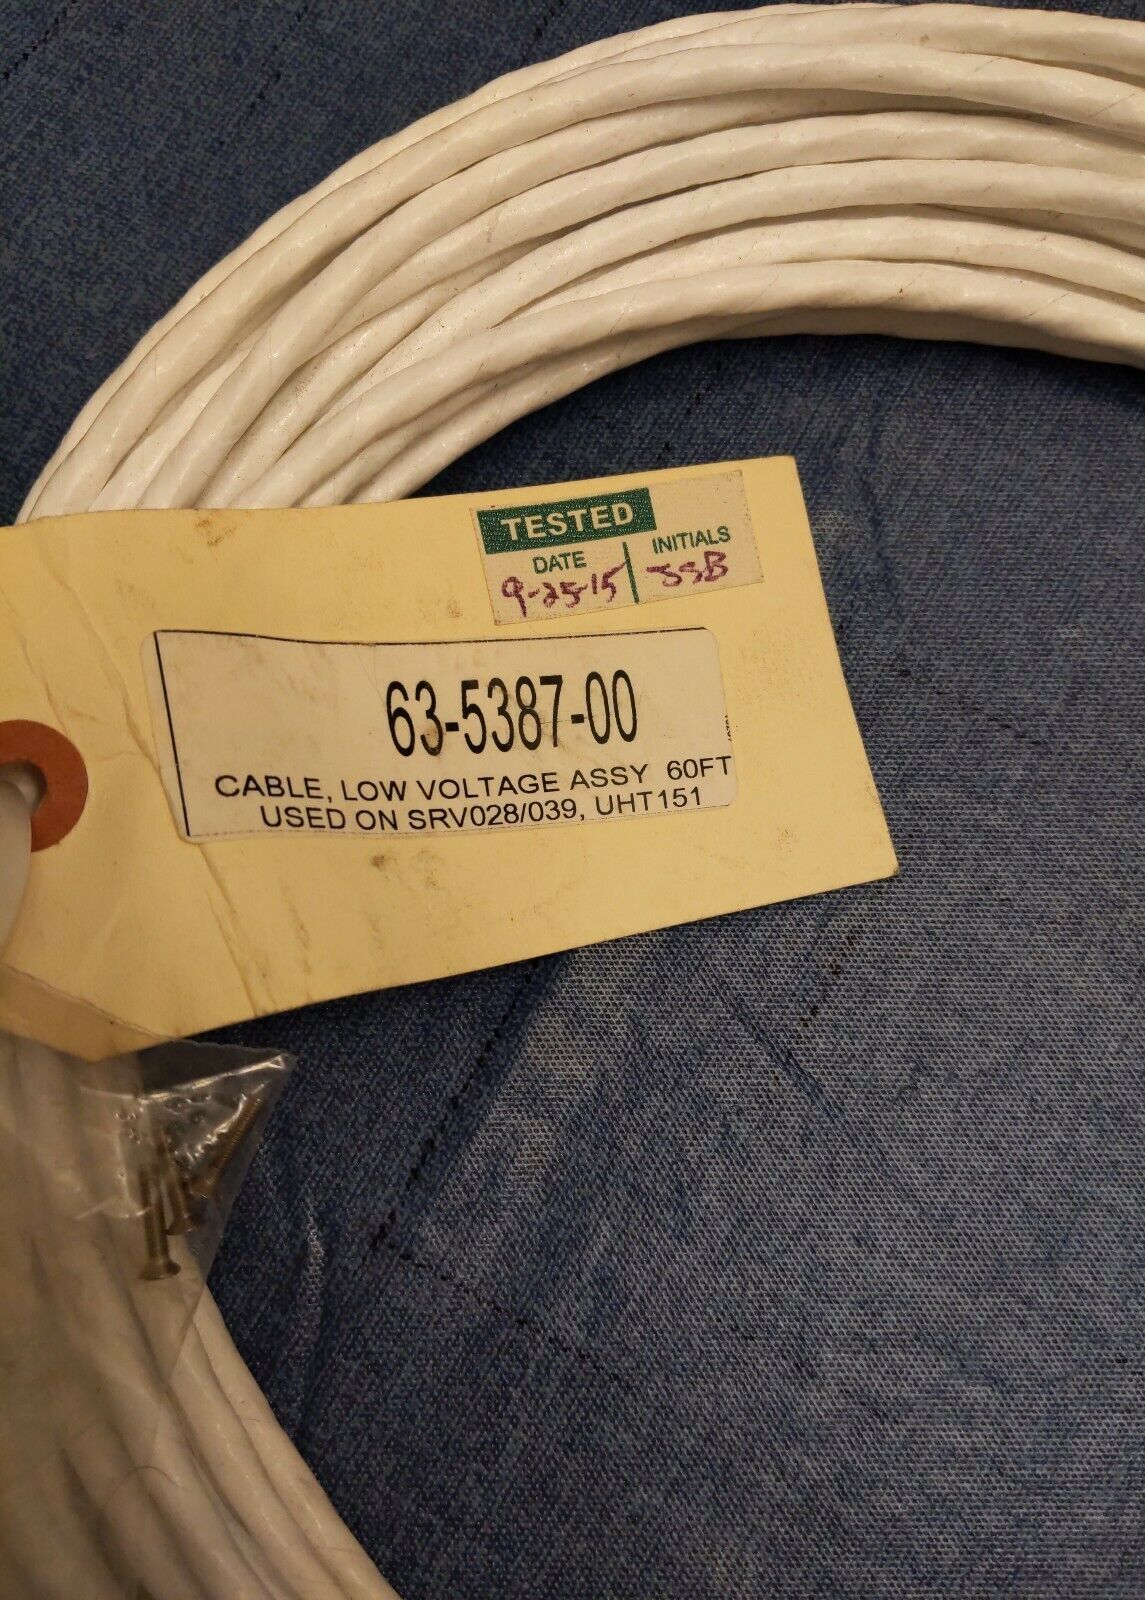 GRAPEK BATES 63-5387-00 LOW VOLTAGE CABLE ASSEMBLY USED ON SRV028/039 CBL102